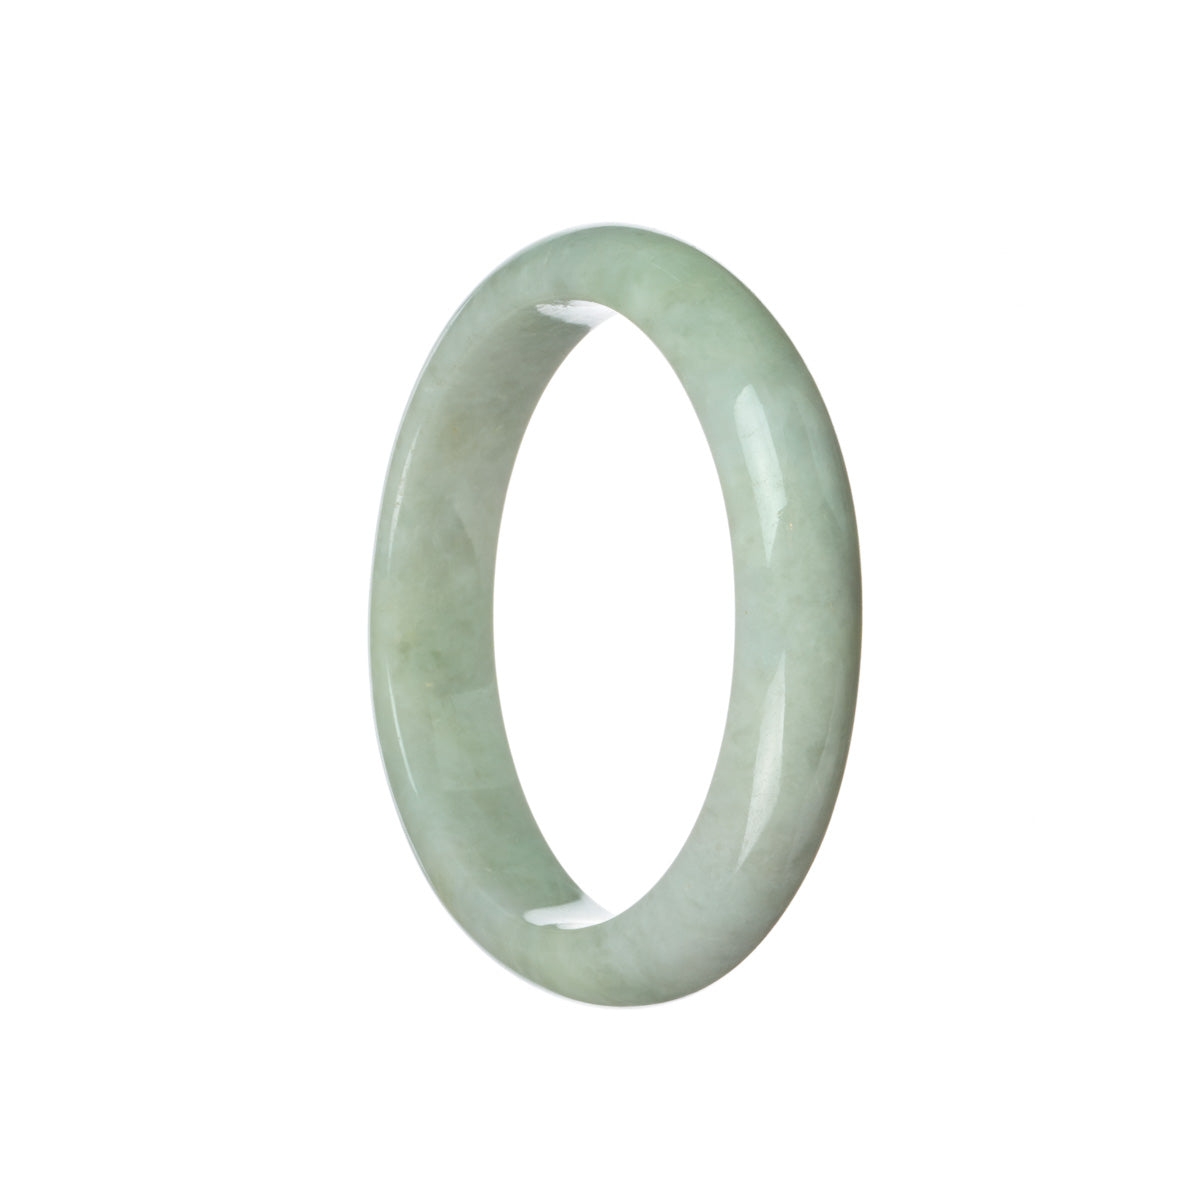 A beautiful green Burma jade bangle with a half moon shape, made of genuine Grade A jade. Perfect for adding a touch of elegance to any outfit.